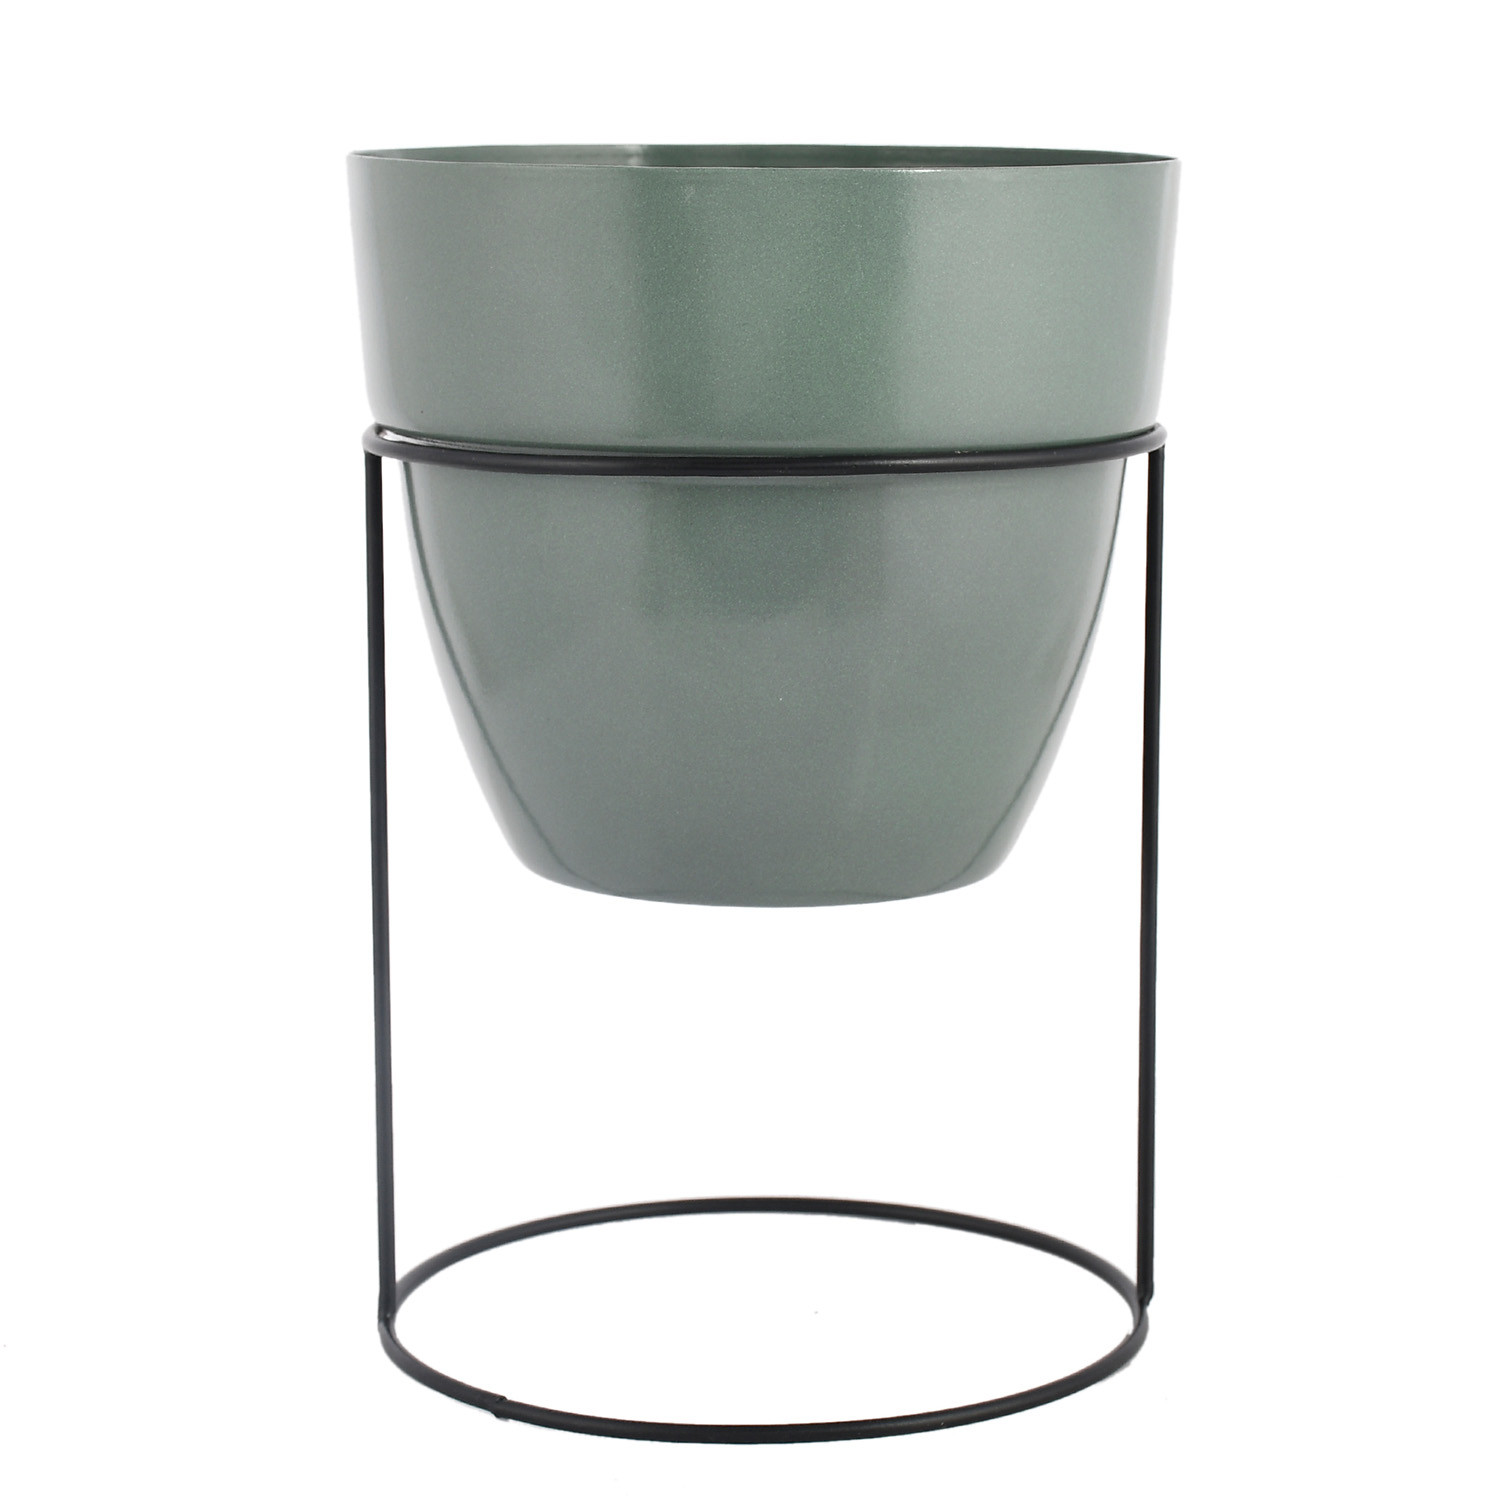 Kuber Industries Metal Planter|Decorative Modern Indoor Desk Pot|Iron Table Stand Flower Planter Pot For Home Décor,8.5 Inches,Pack of 2 (Green & Gray)